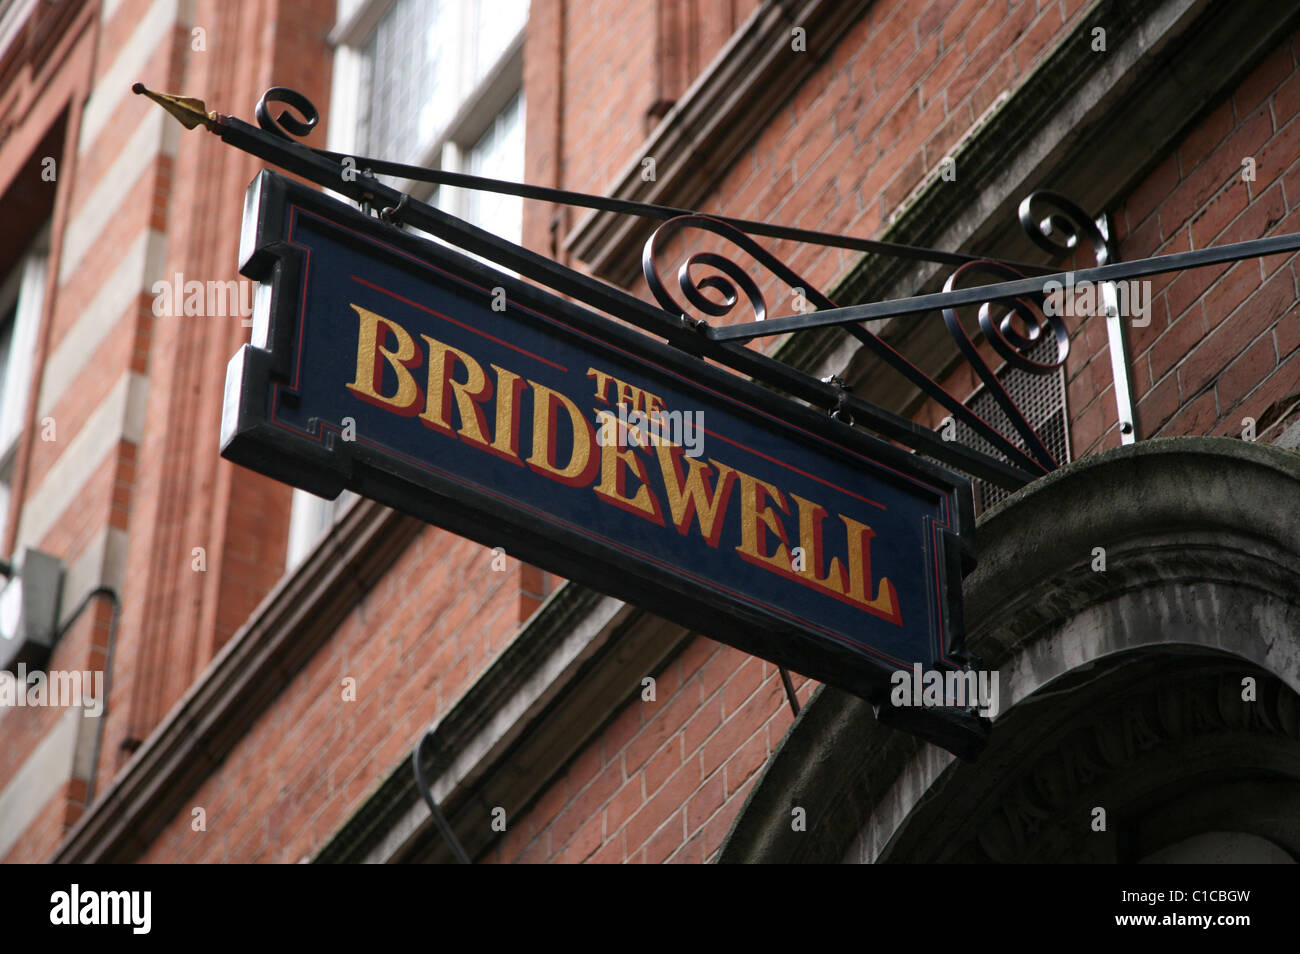 General View gv of the Bridewell Theatre in Blackfriars, London, England. Stock Photo